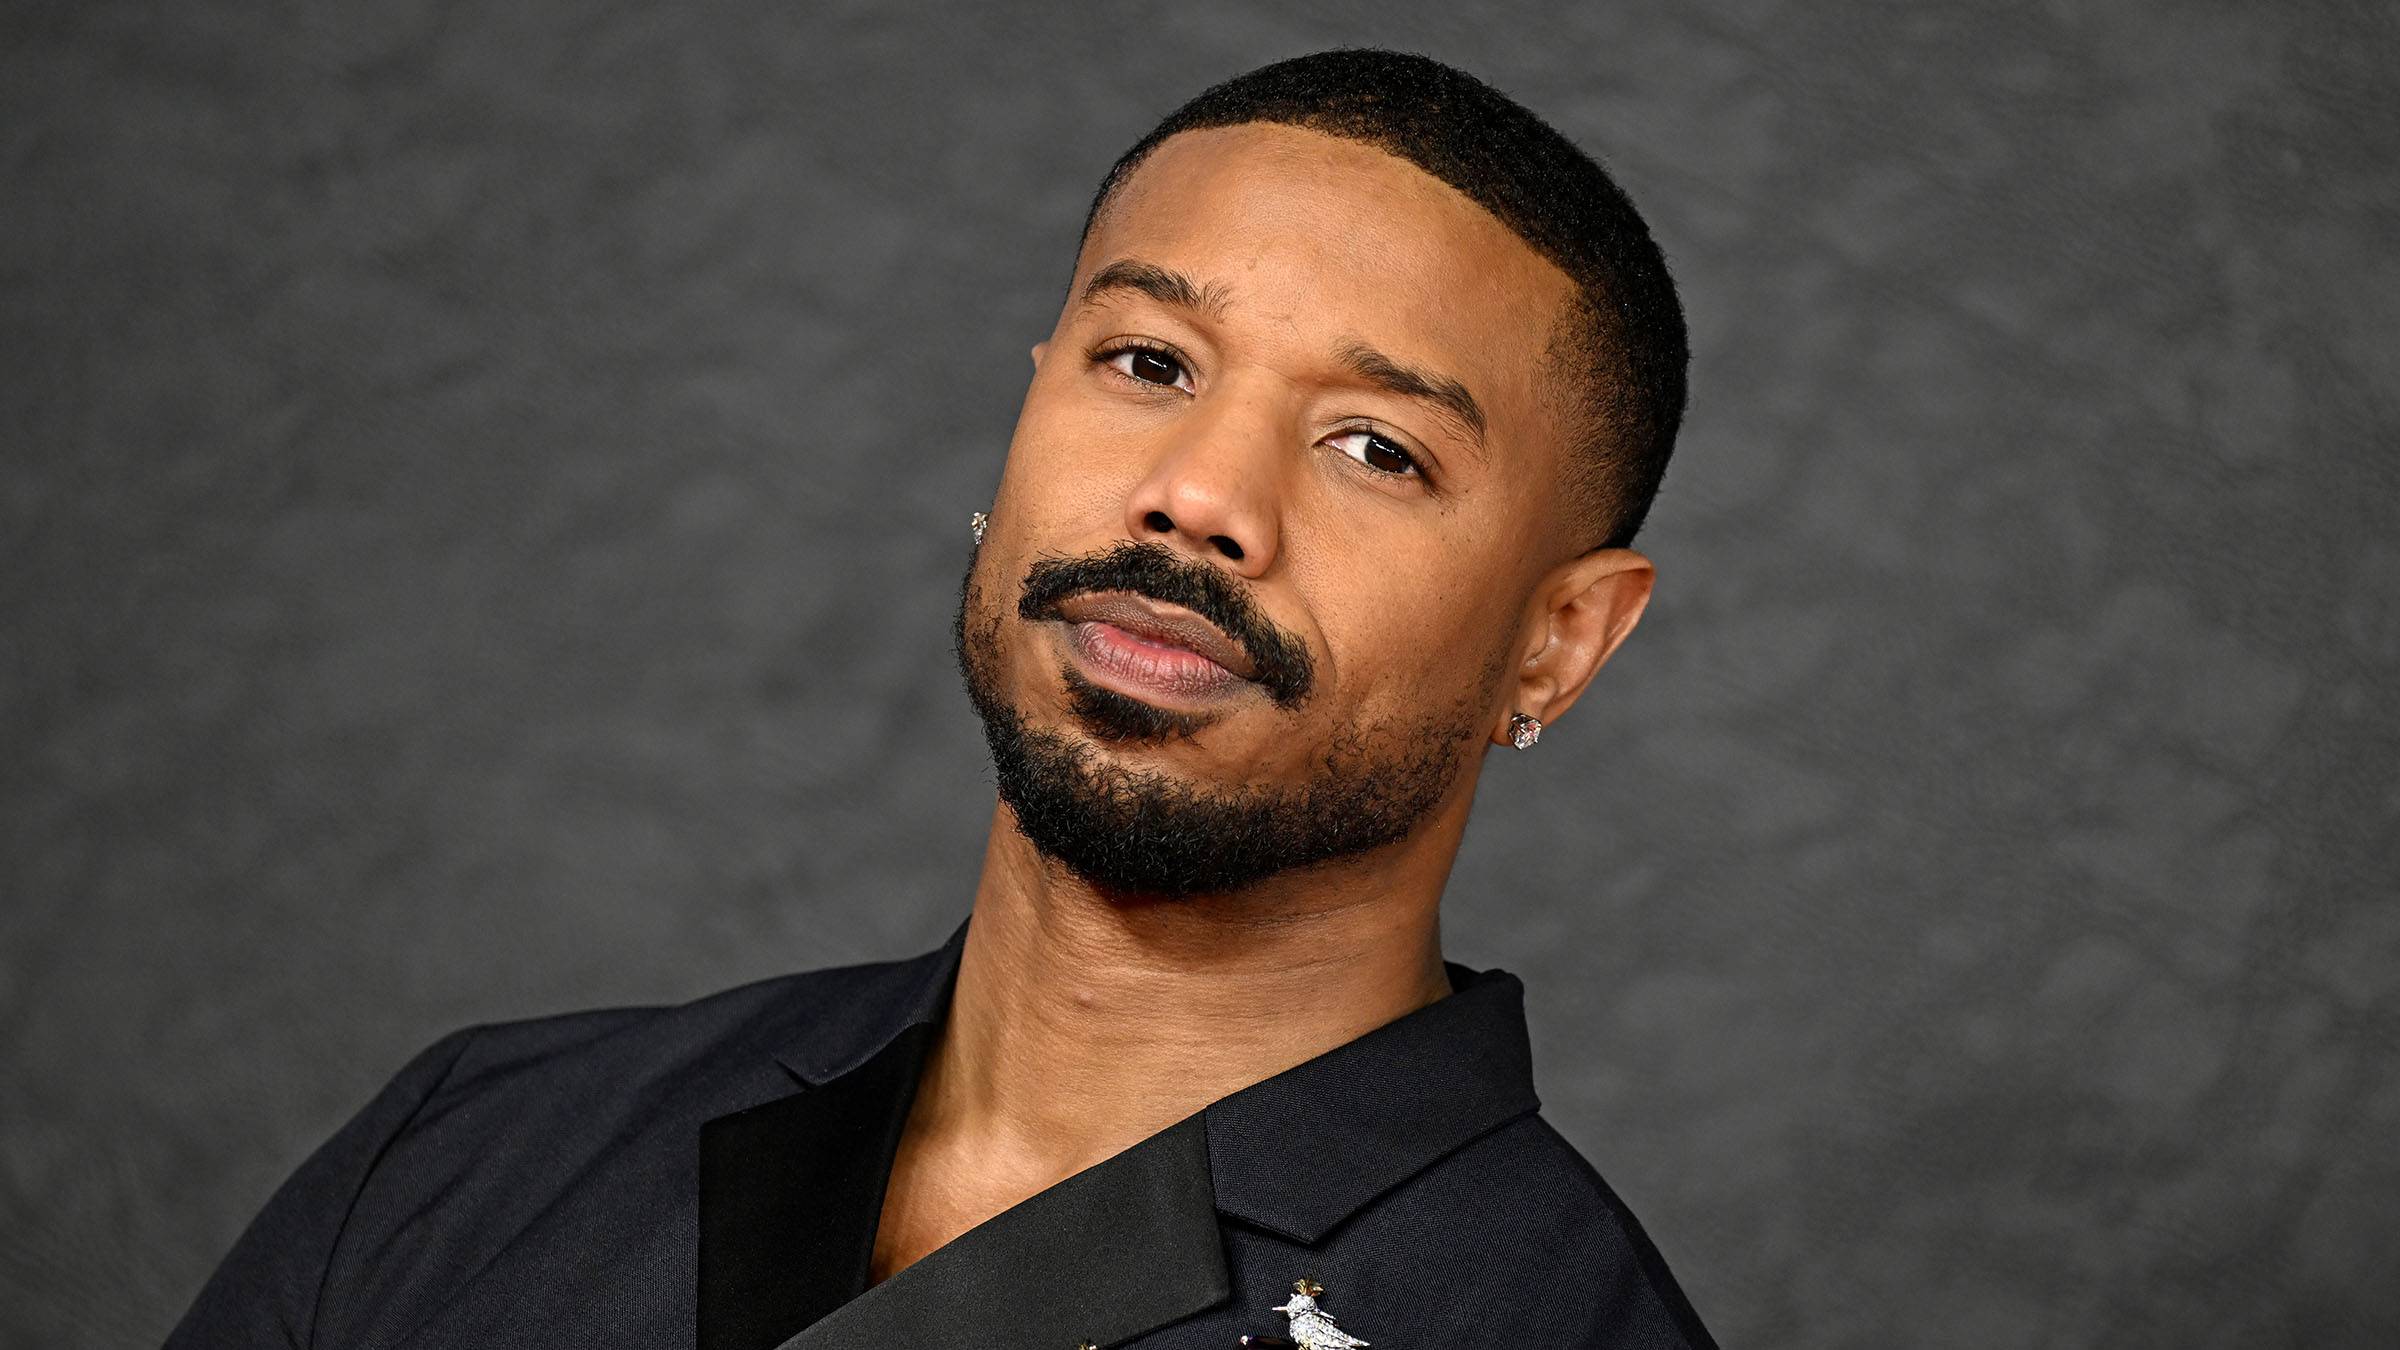 Michael B. Jordan is ever the stylish star while attending a